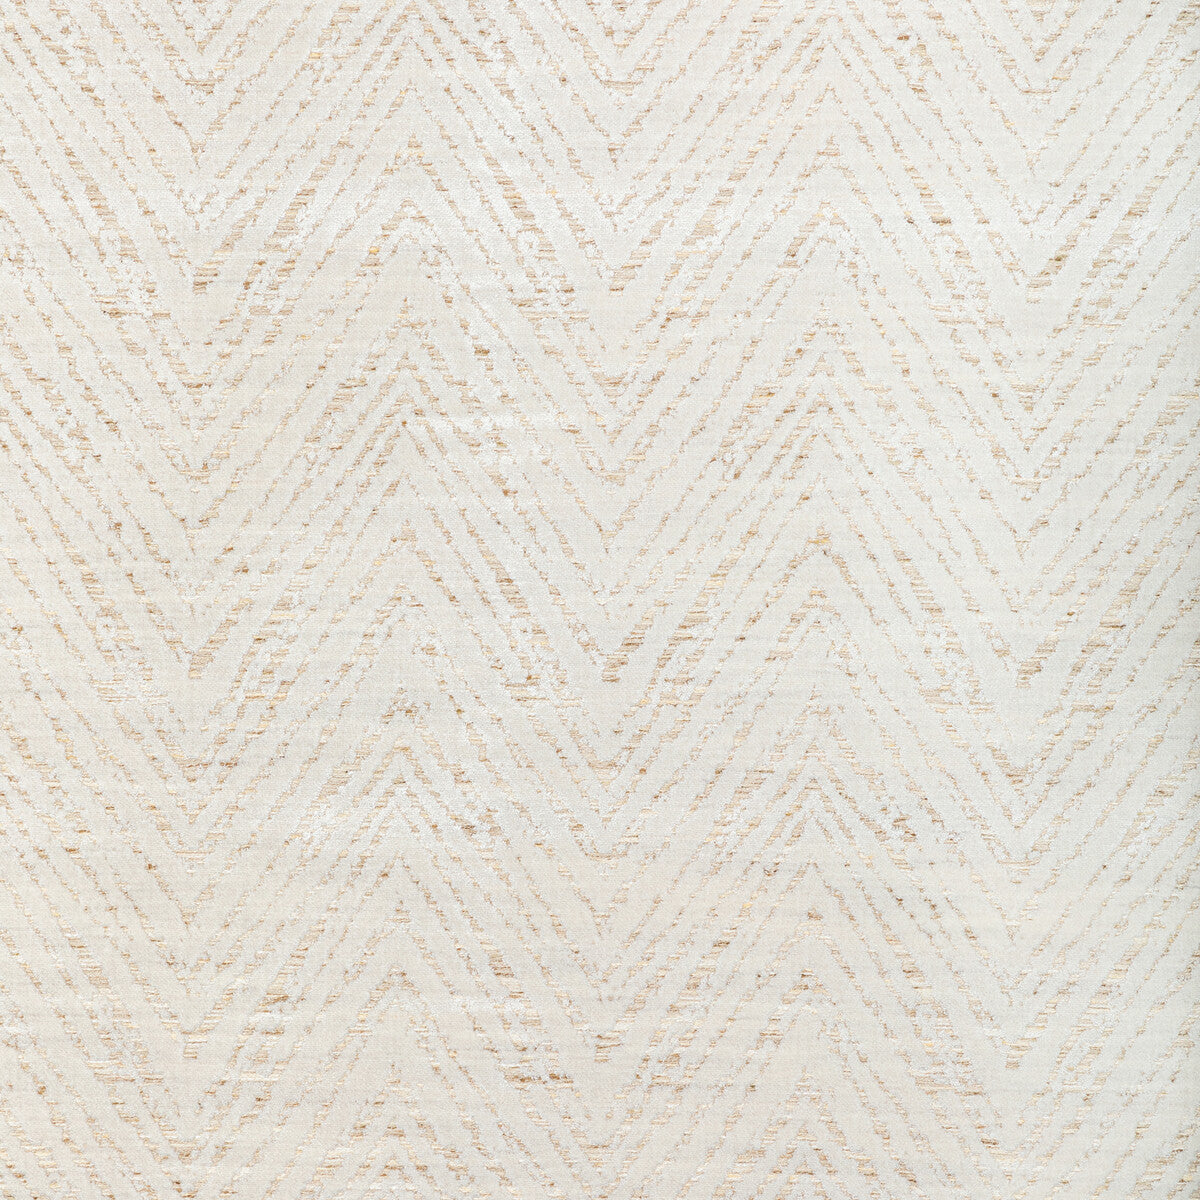 Gorge Hike fabric in sand color - pattern 36365.16.0 - by Kravet Design in the Jeffrey Alan Marks Seascapes collection